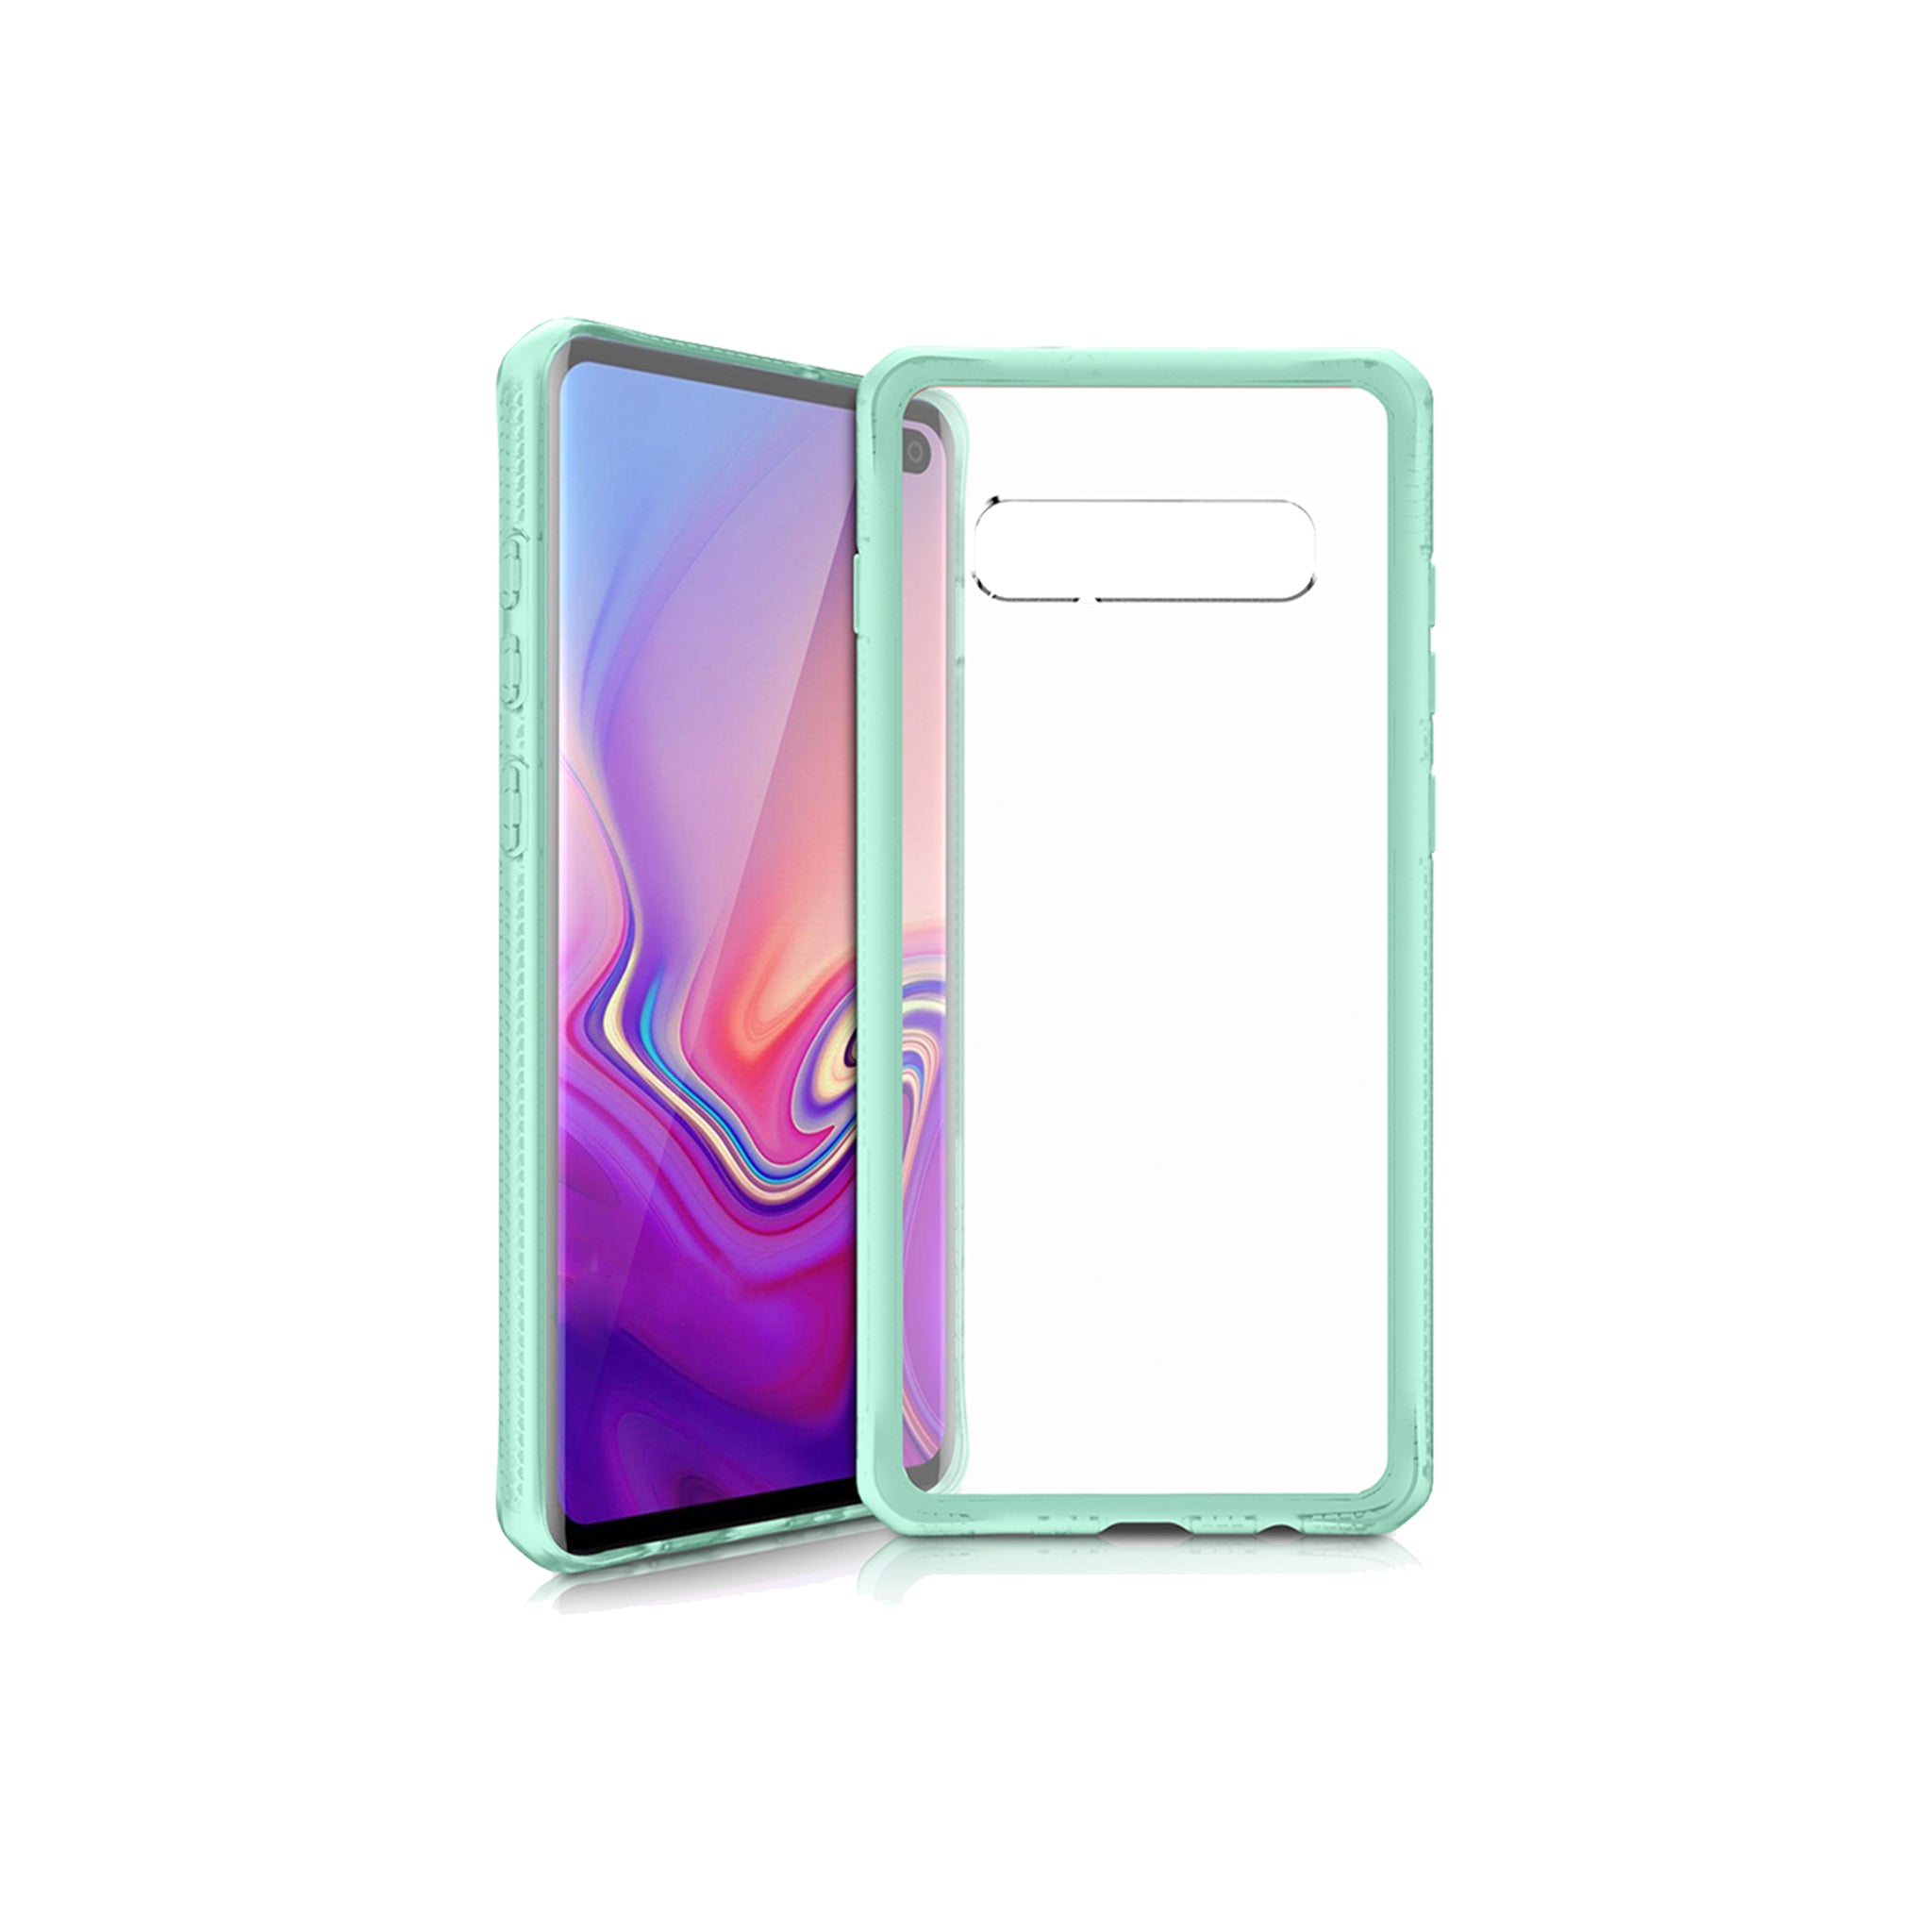 Itskins - Hybrid Frost Mkii Case For Samsung Galaxy S10 Plus - Tiffany Green And Transparent